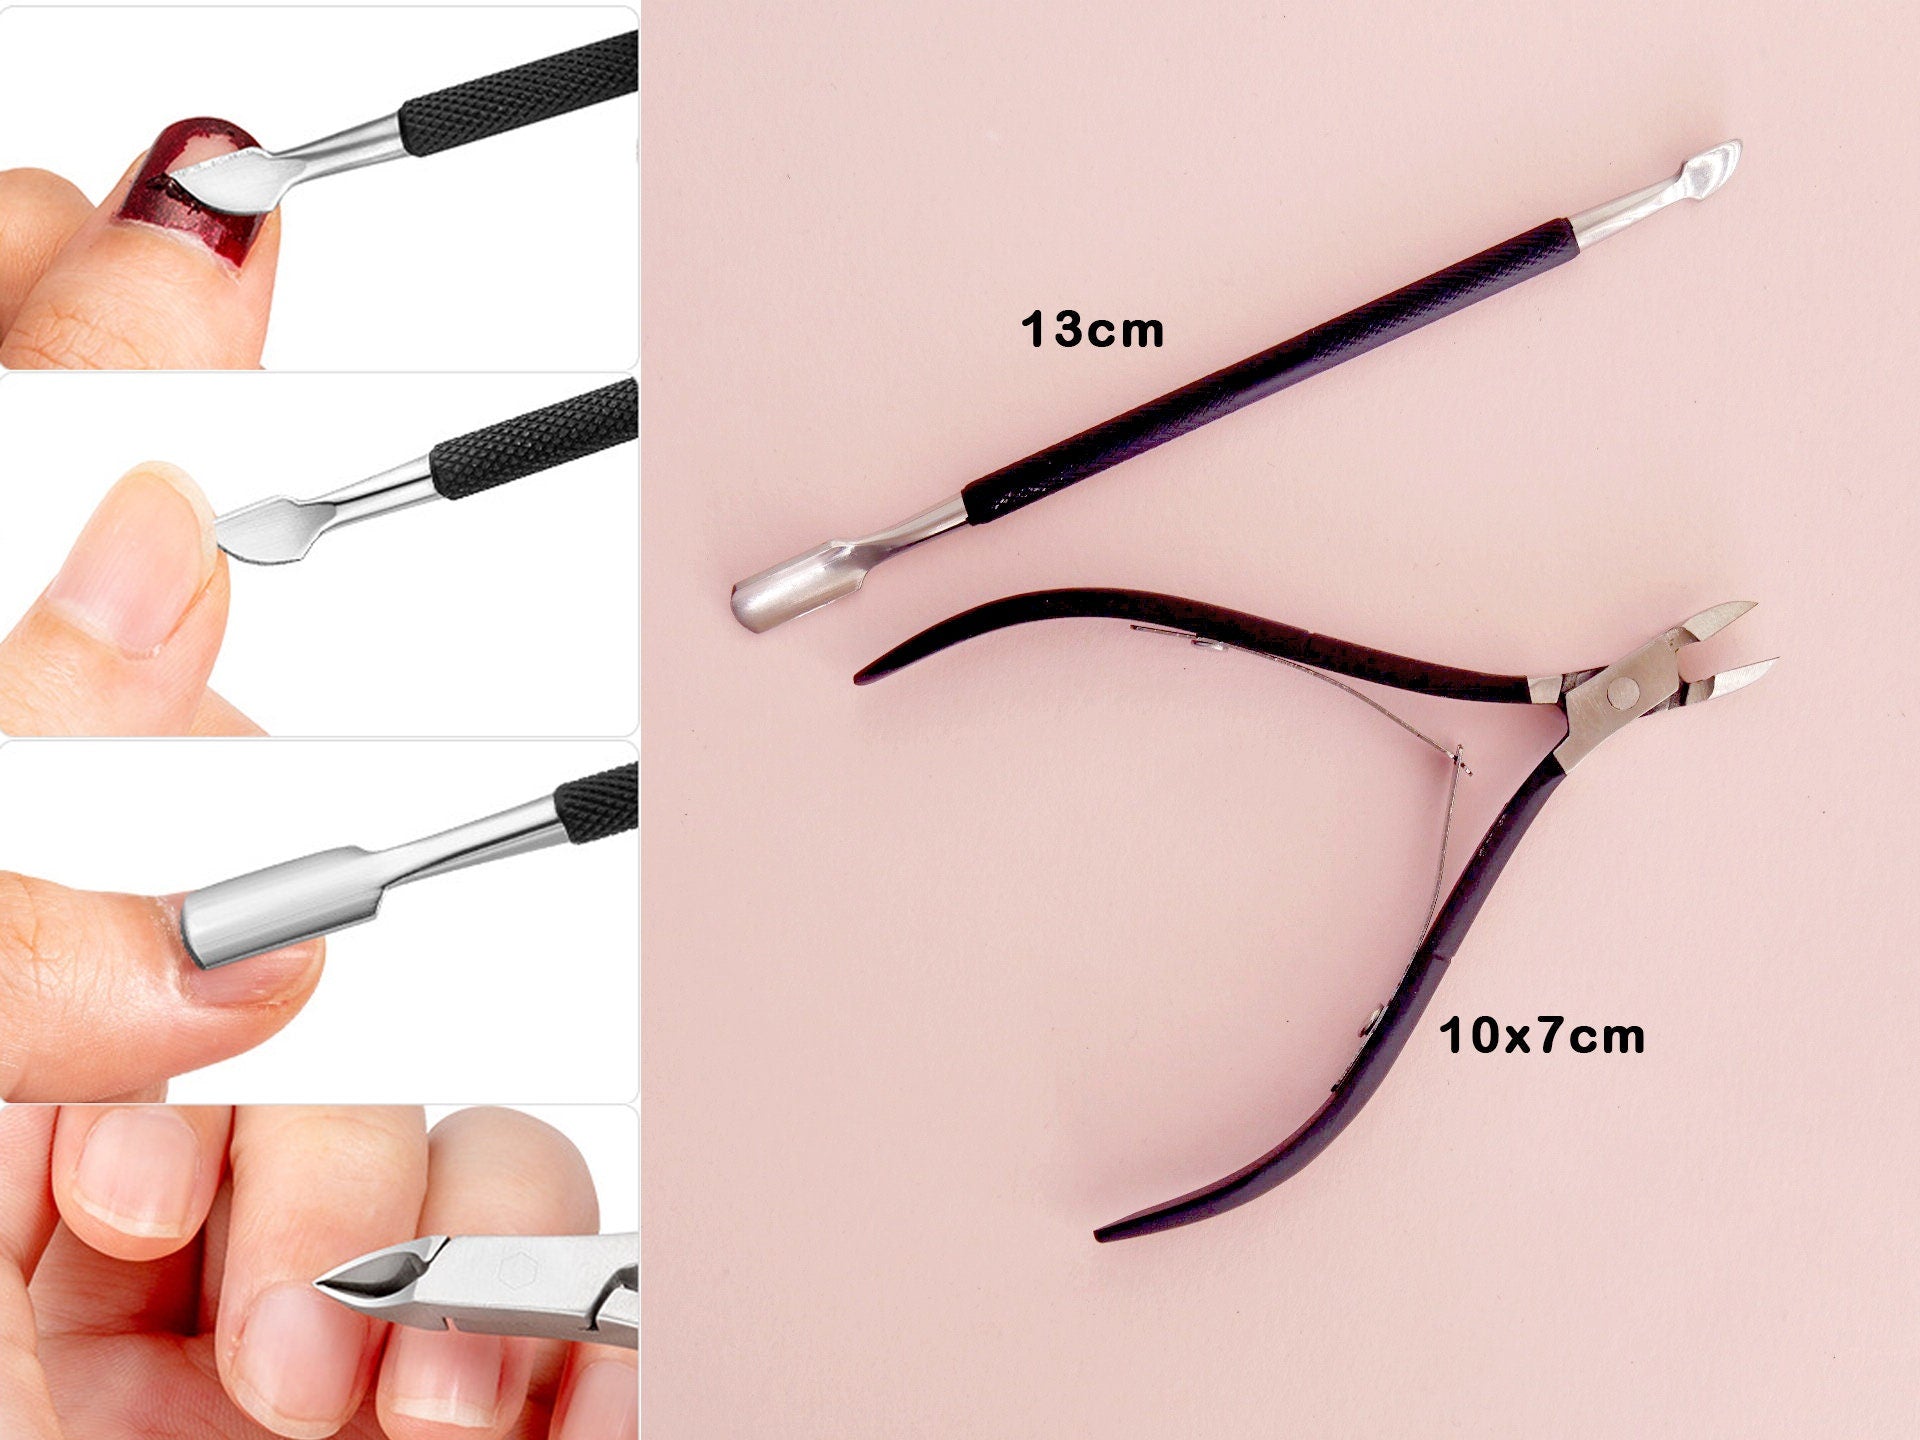 1 set Black Stainless steel Nail Cuticle Nippers Cutter Dead Skin Scissor Nails Remover Pusher Cuticles Manicure Pedicure Care Tool